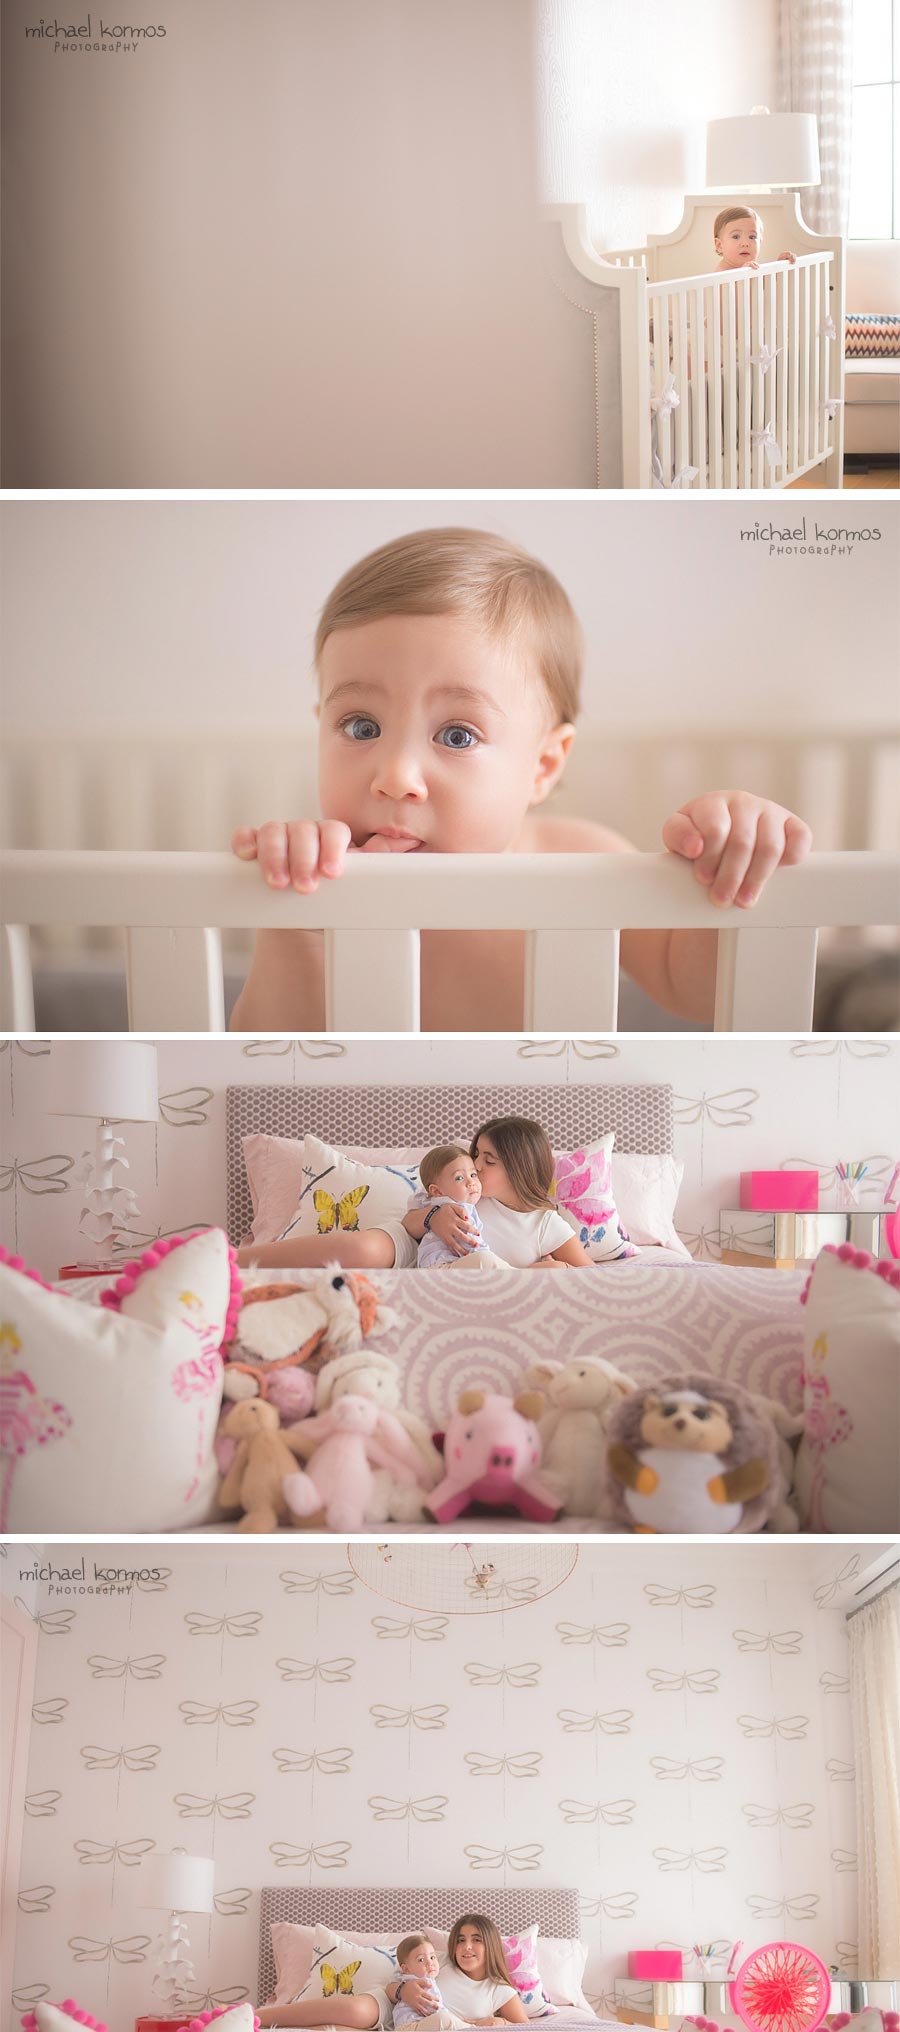 NYC Lifestyle Baby Photography captured in Manhattan home